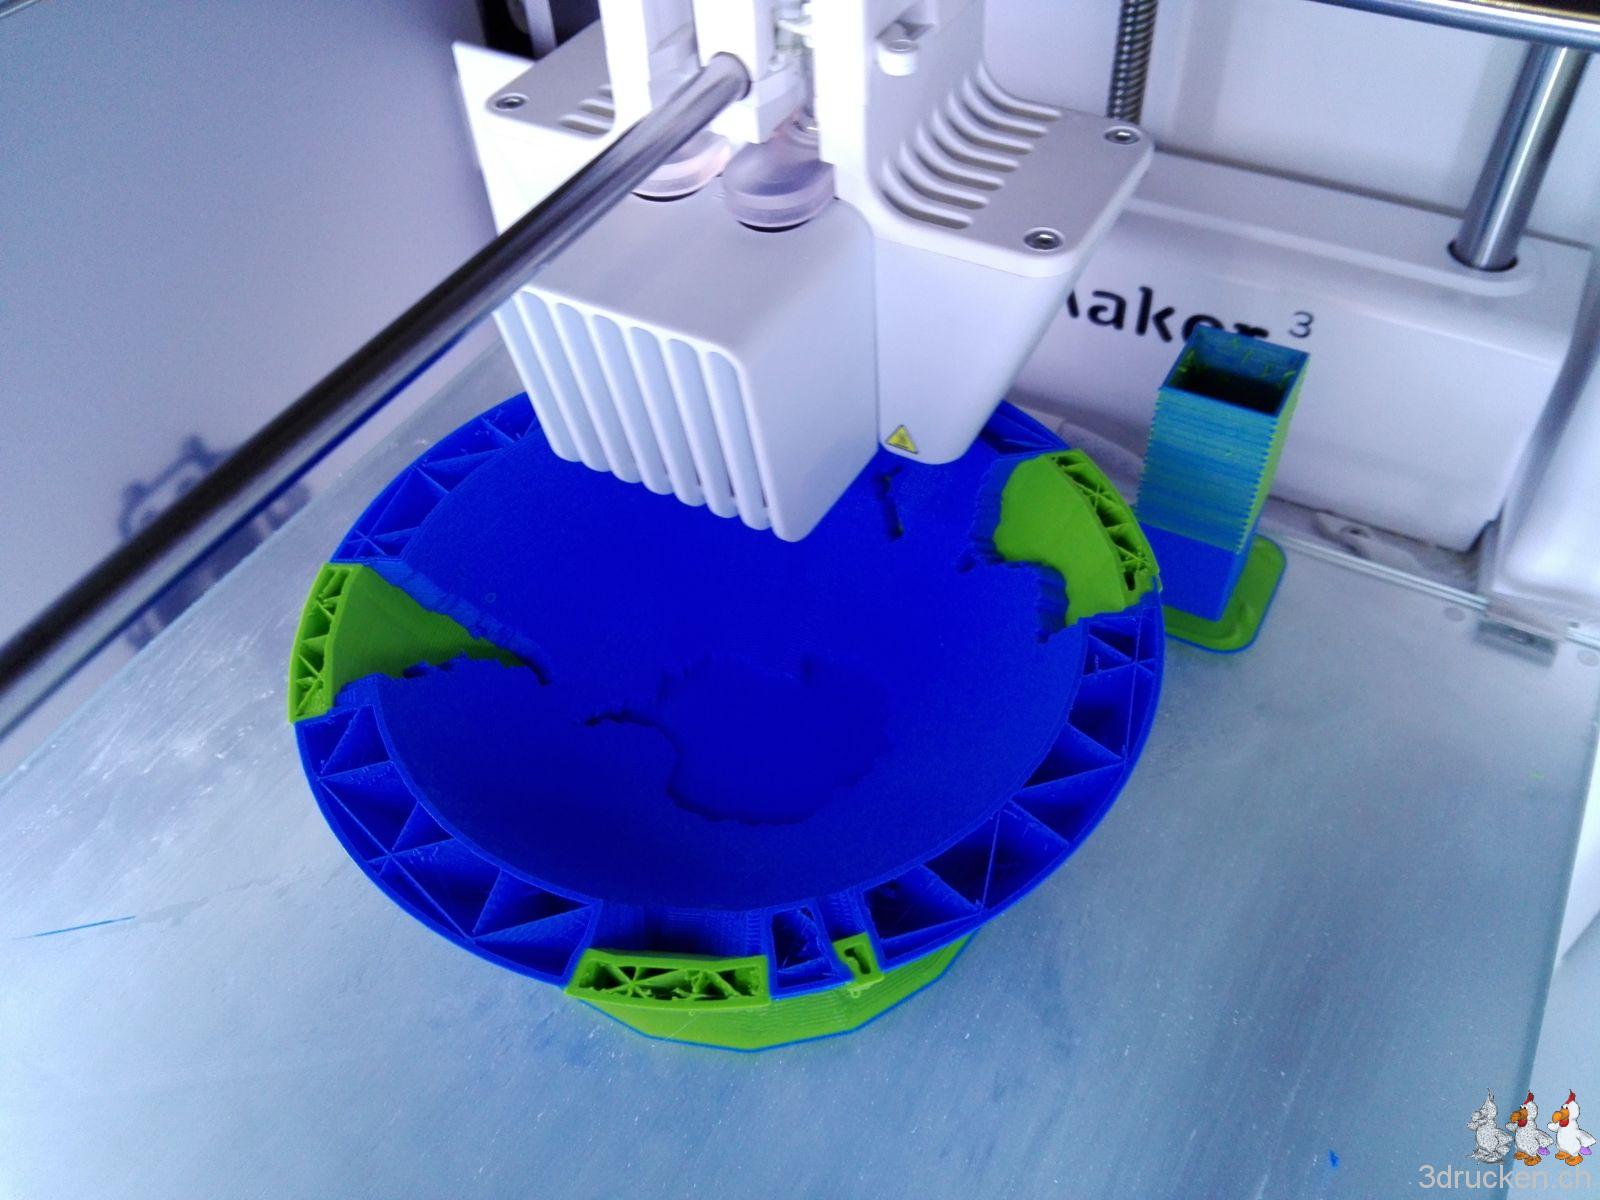 Ultimaker 3 Review